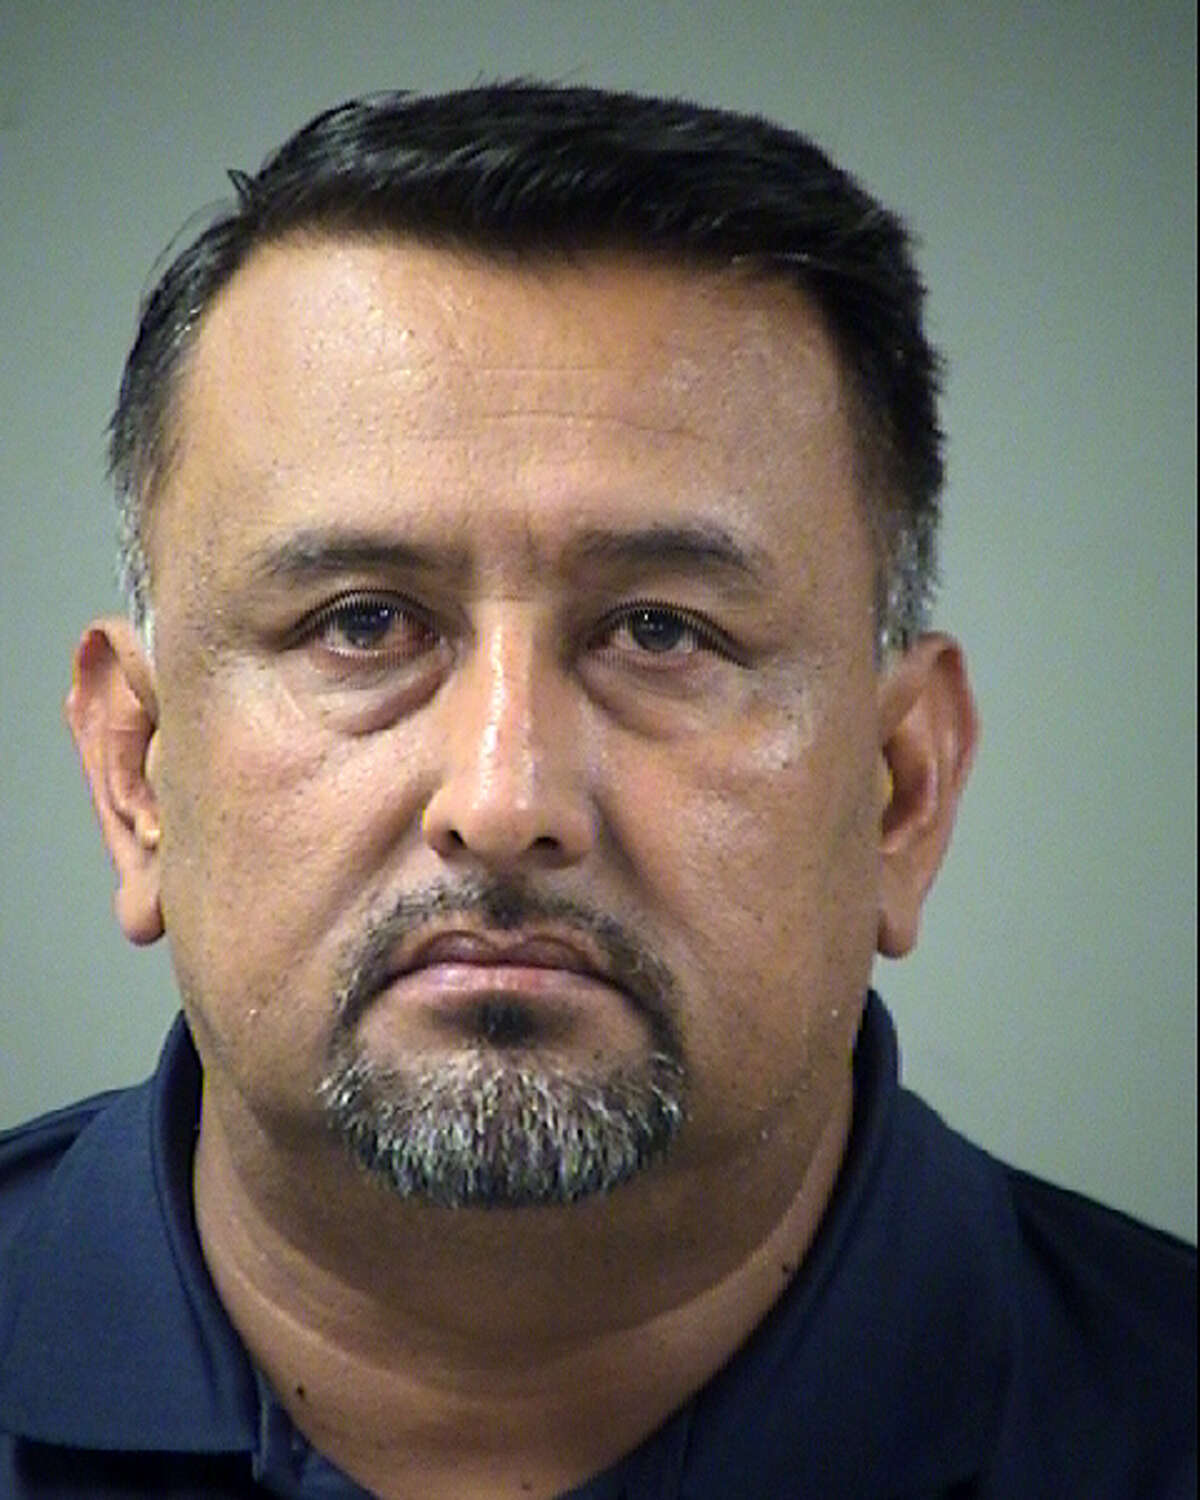 Benito Duarte Jr. was charged with driving while intoxicated with a child on Oct. 12, 2018.